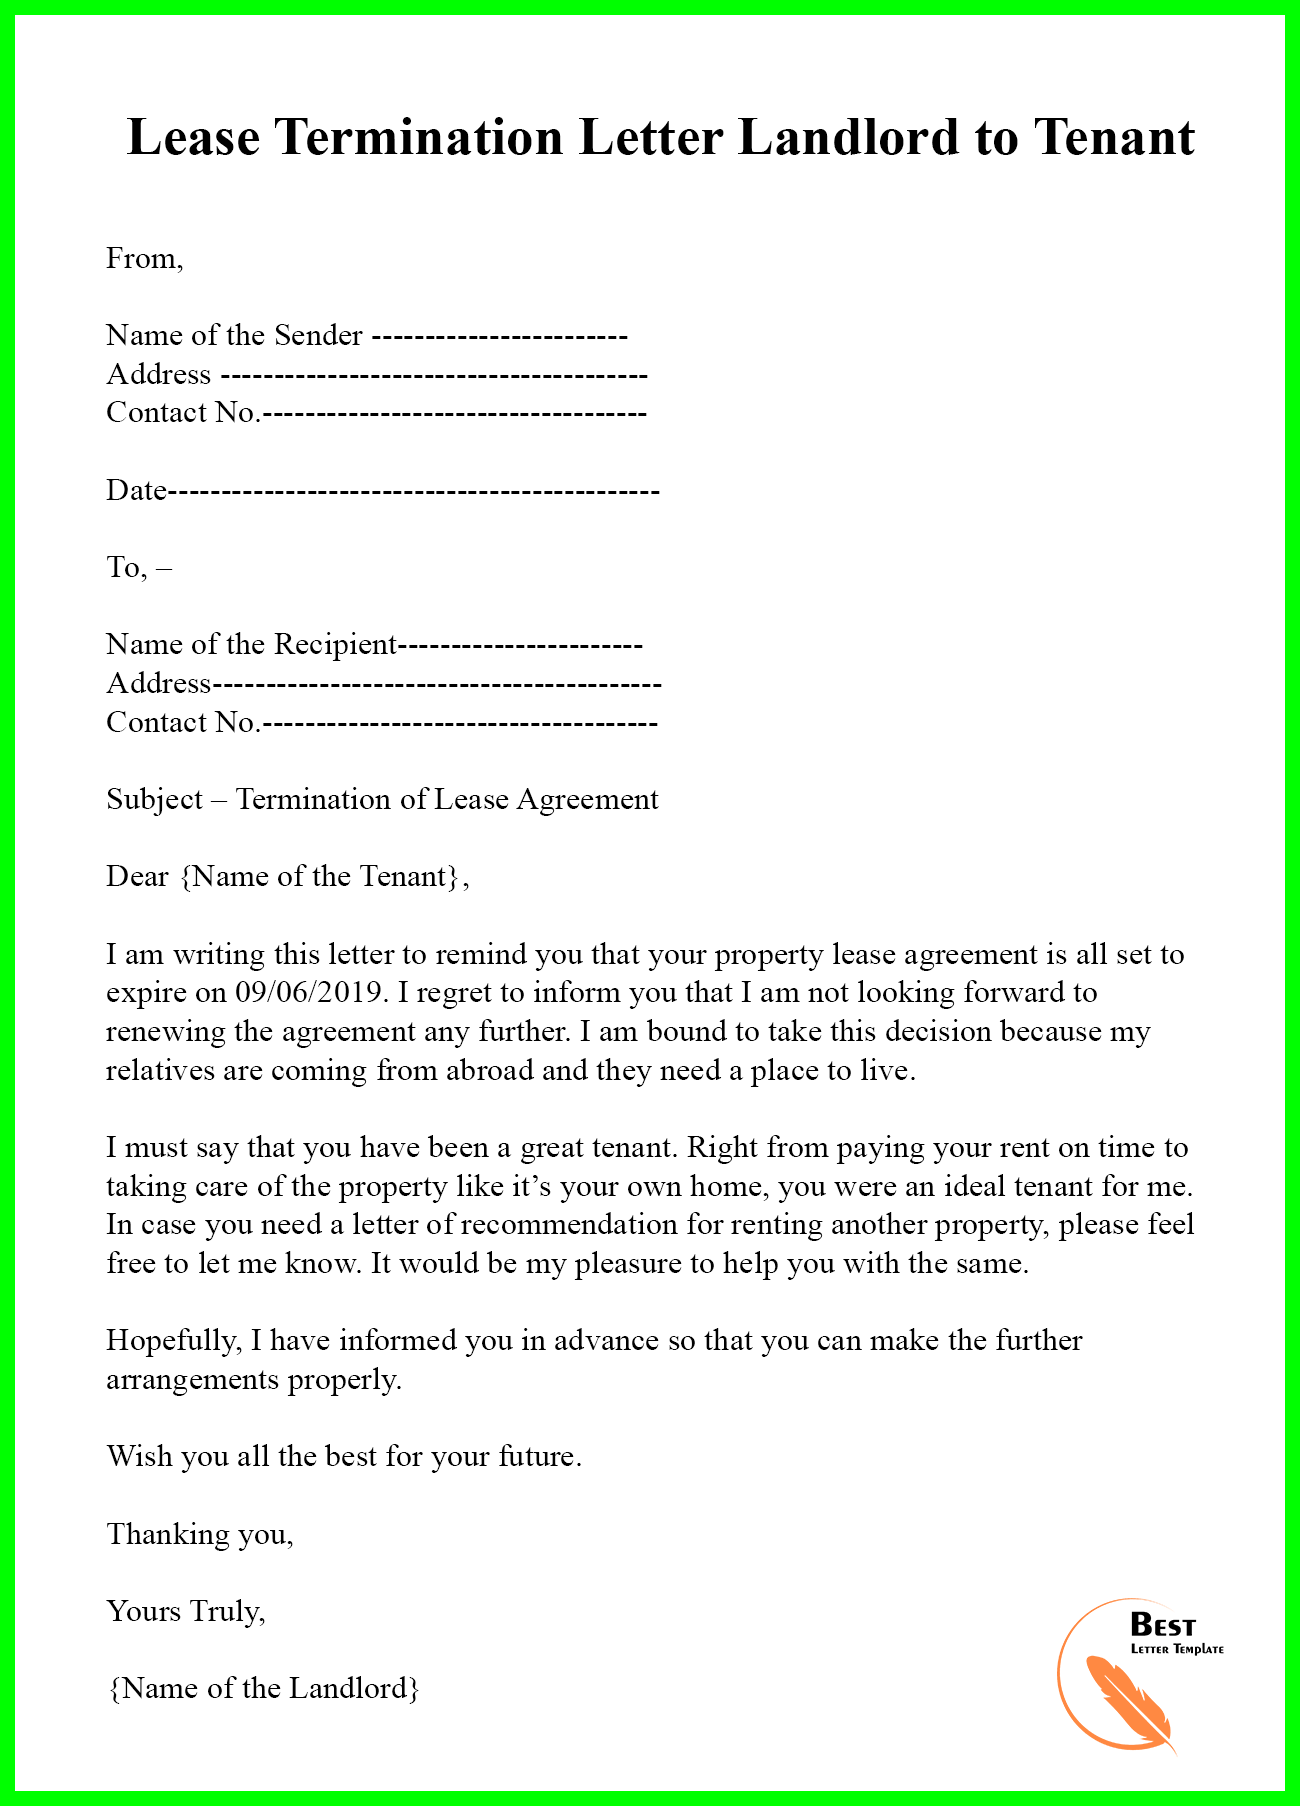 Real Estate Contract Cancellation Letter Sample from bestlettertemplate.com